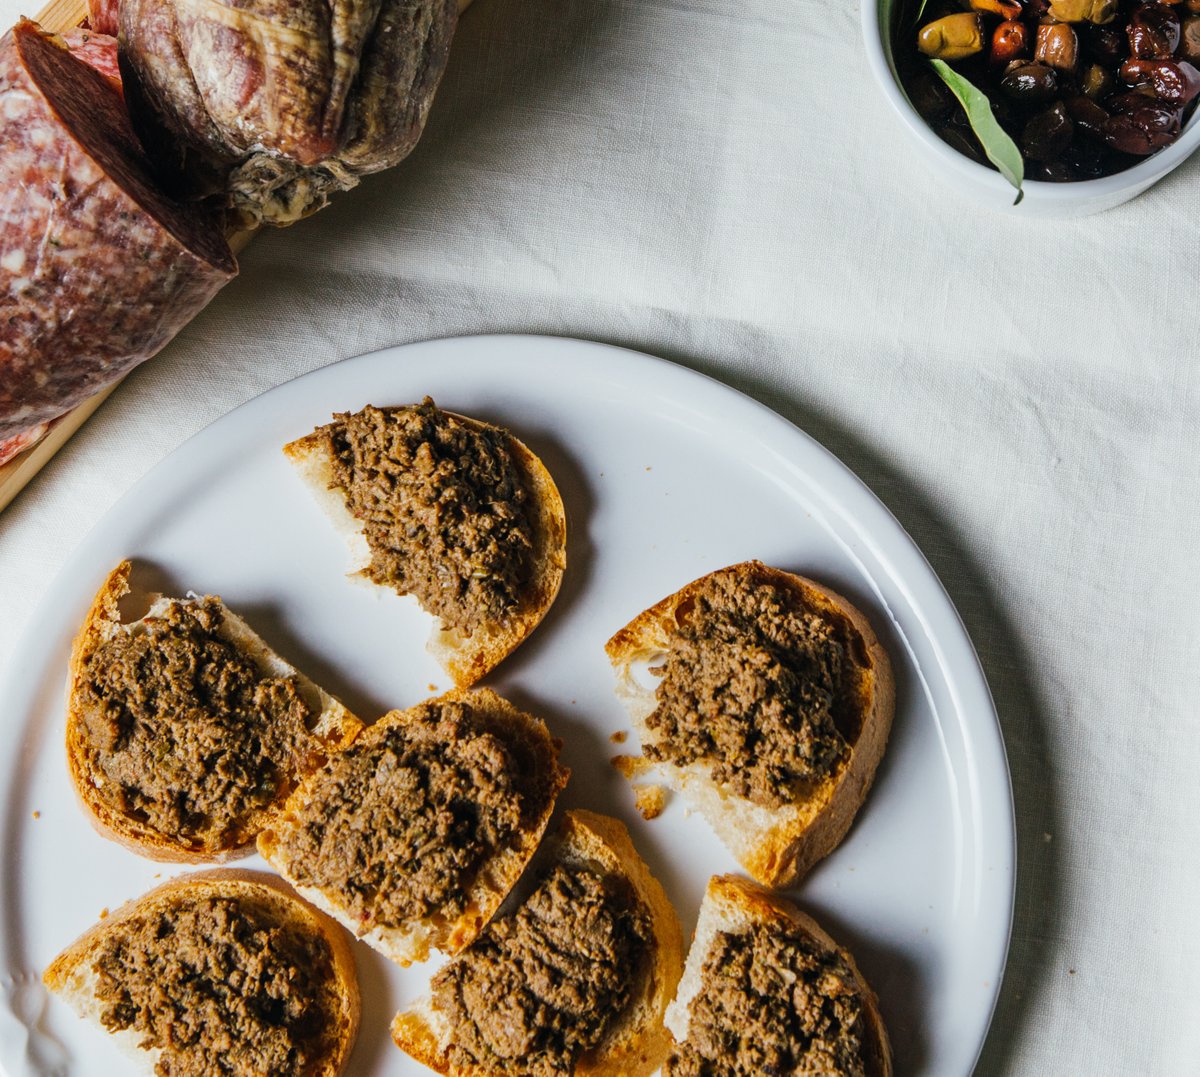 Enjoy exquisite flavors of the Crostini Neri Toscana. This traditional Tuscan appetizer features crispy toasted bread topped with a delectable spread made from chicken liver, capers, and anchovies. ⁠#foodfriday #kissfromitaly #italiancuisine